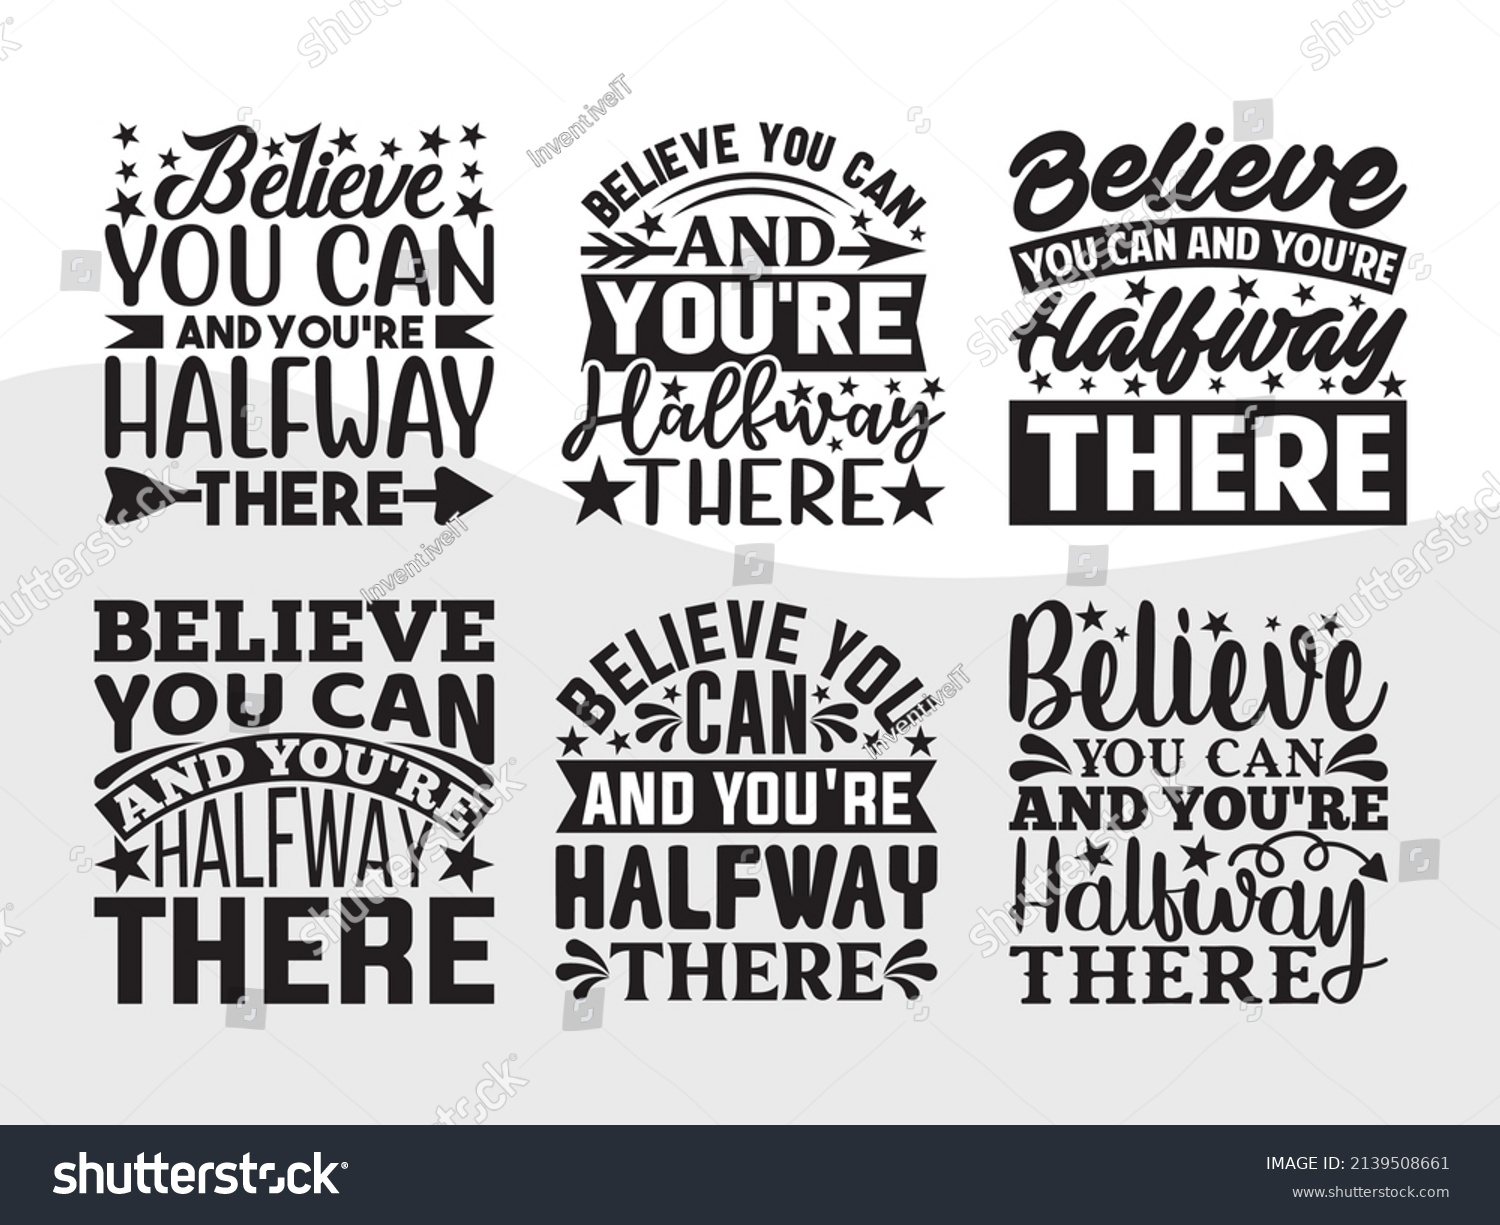 SVG of Believe You Can And You're Halfway There Printable Vector Illustration svg